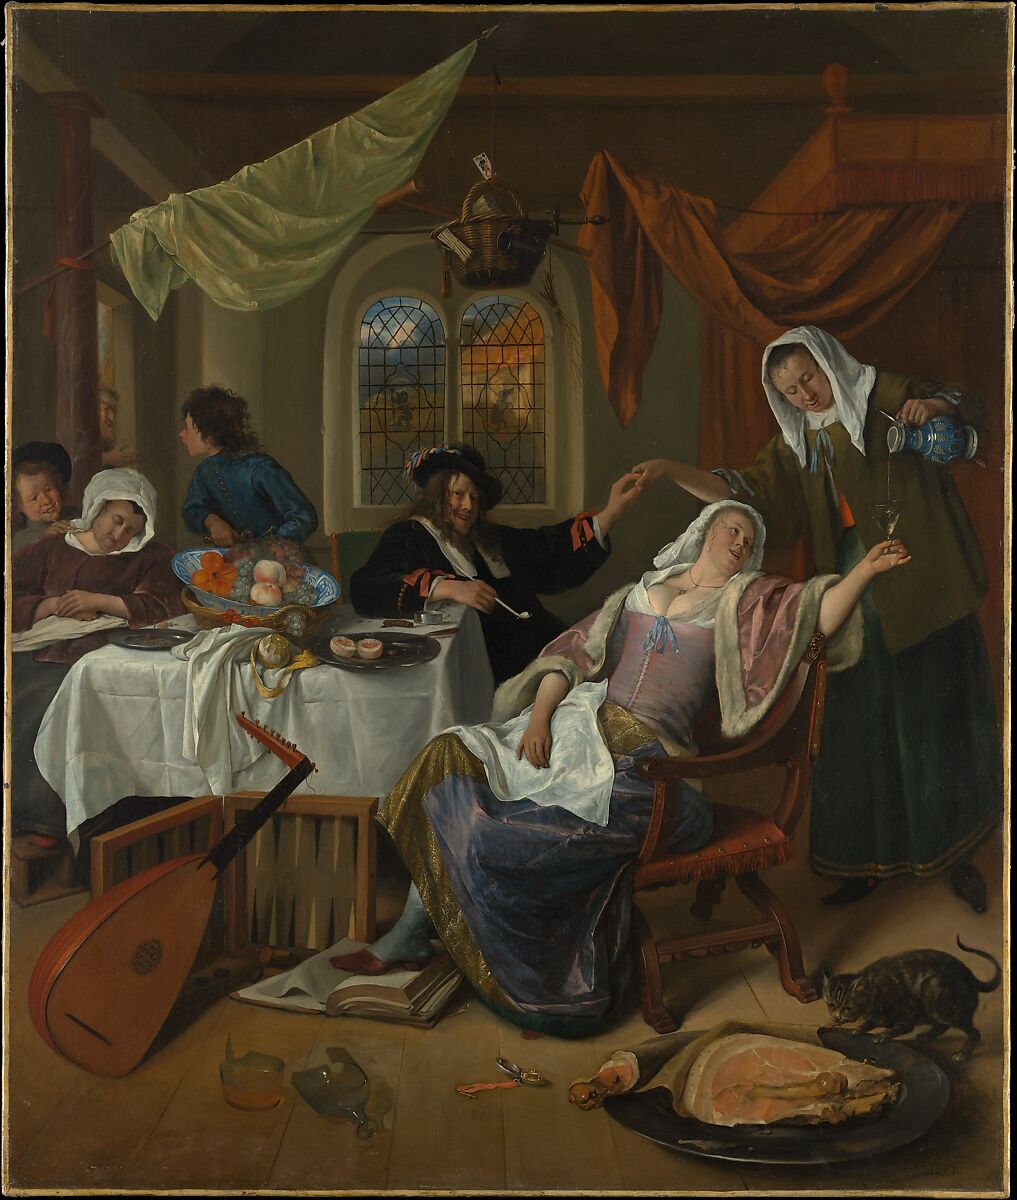 The Dissolute Household, Jan Steen, Oil on canvas